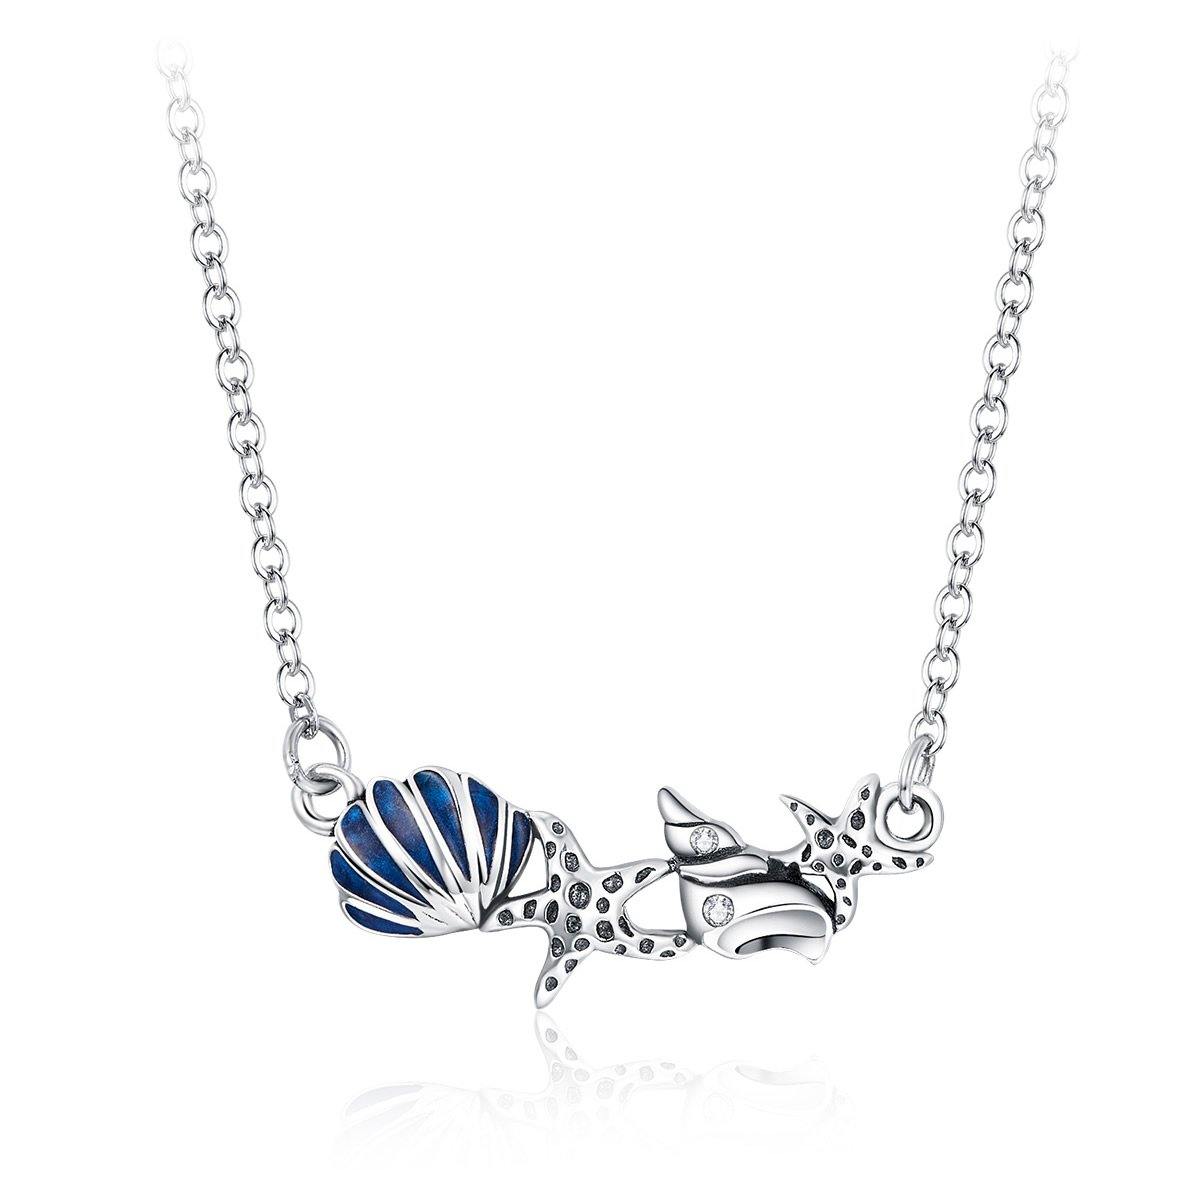 Summer Ocean 925 Sterling Silver Necklace - Aisllin Jewelry